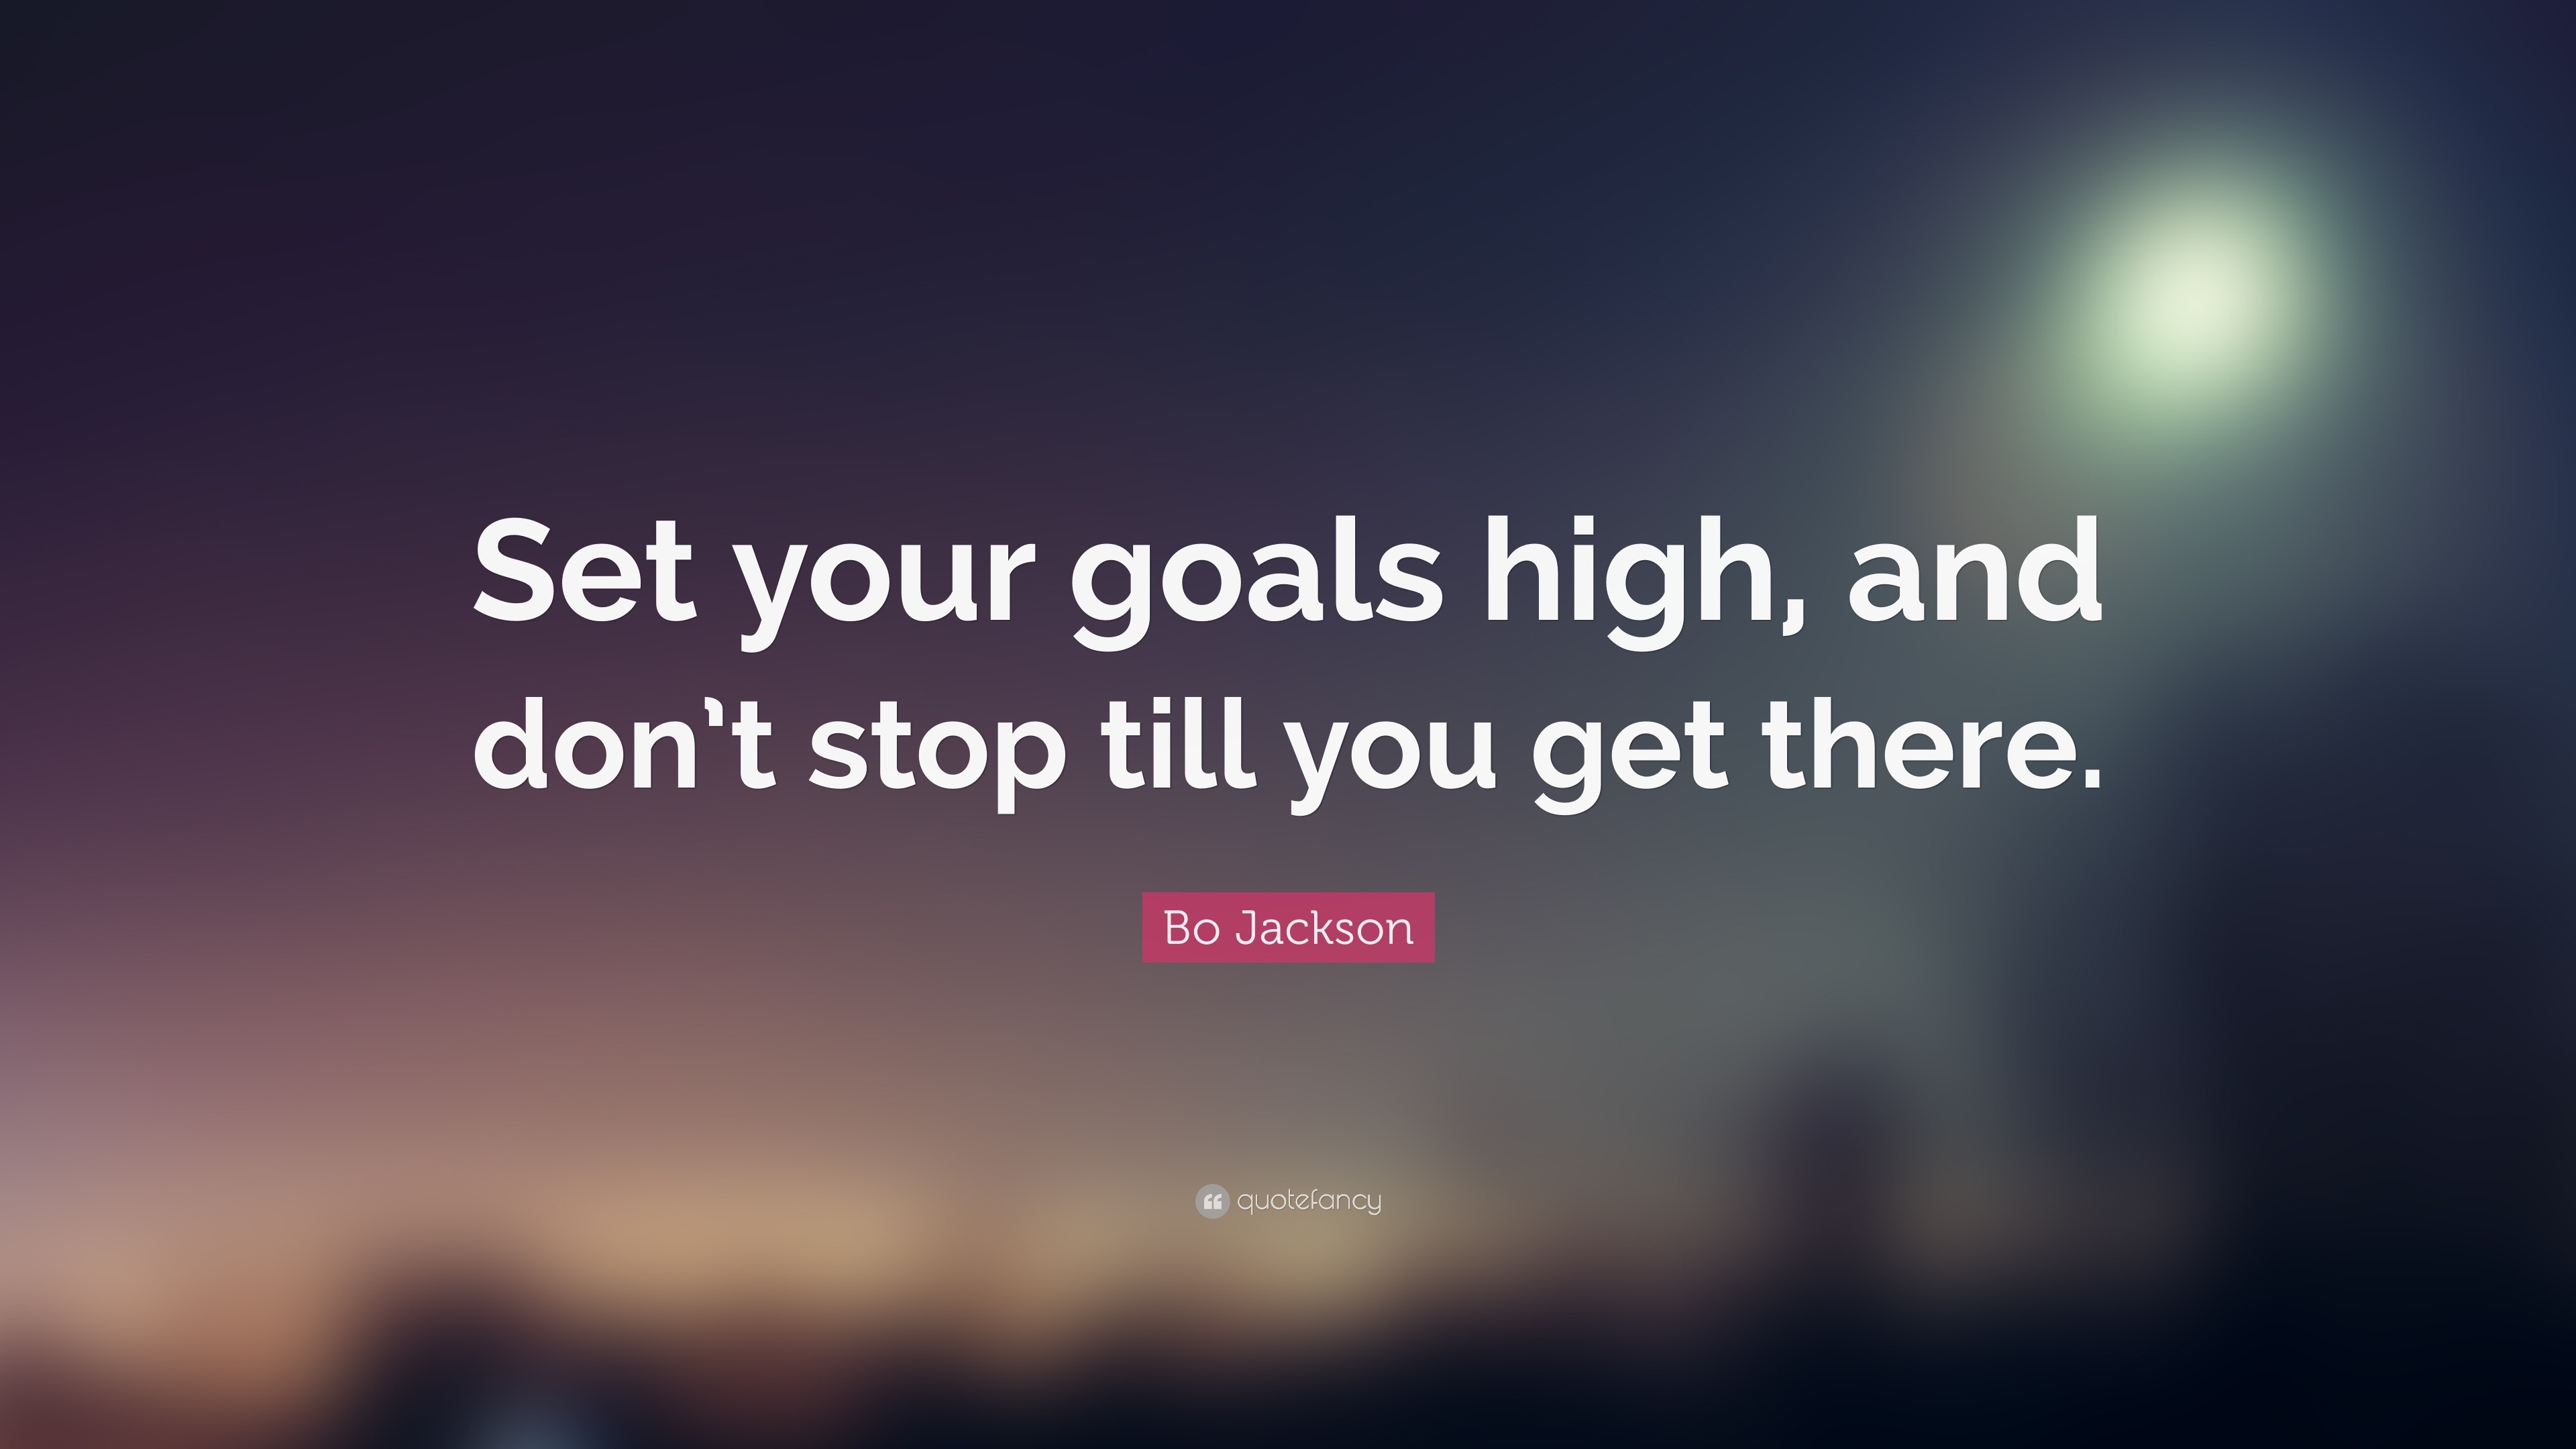 Bo Jackson Quote: “Set your goals high, and don’t stop till you get there.”